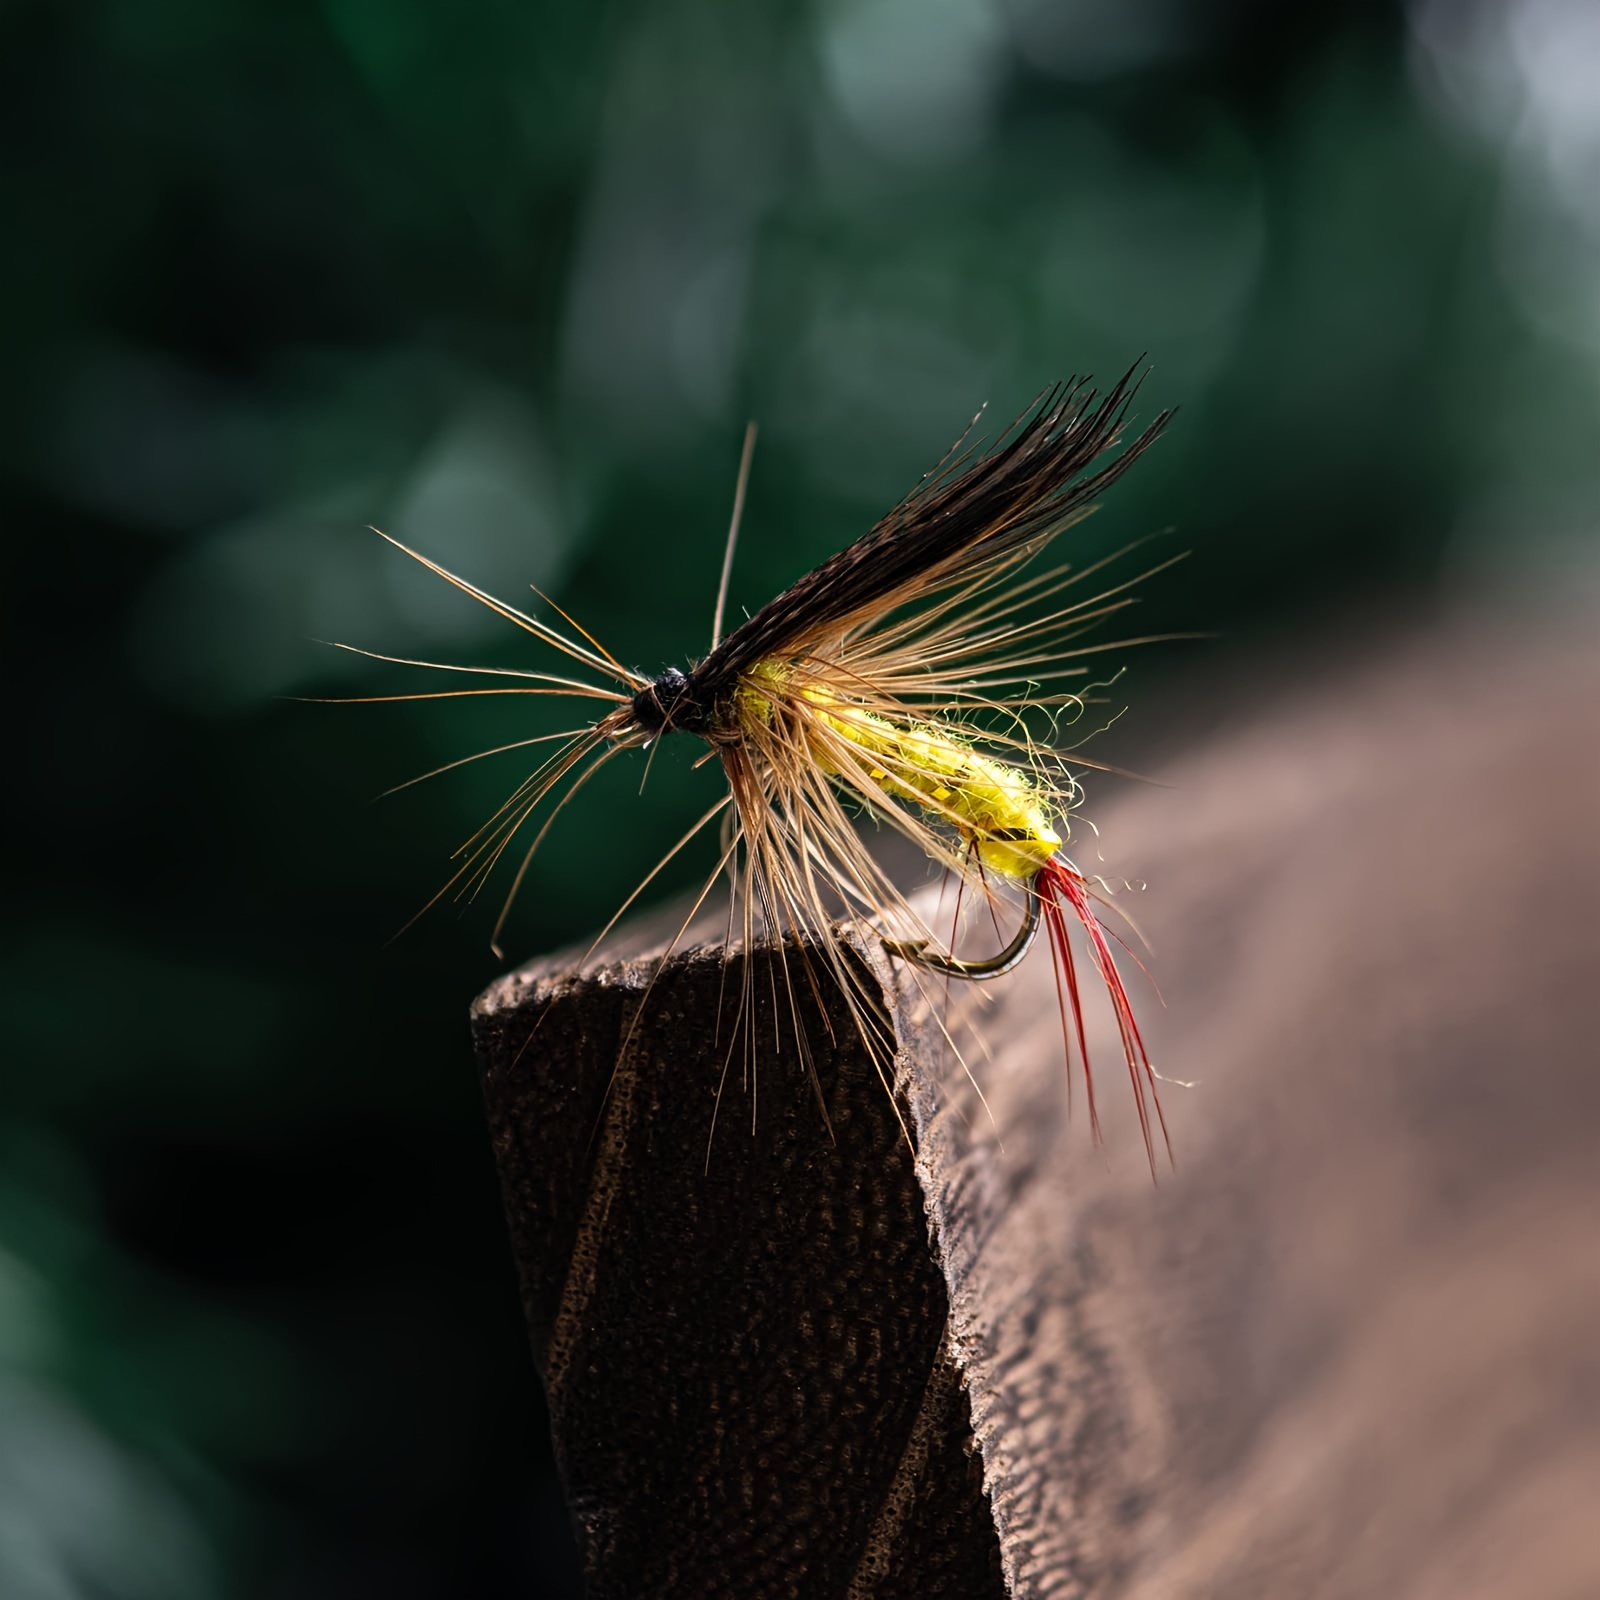 Trout Fly Fishing Flies Collection 32-112Pcs Flies Dry Wet Nymph